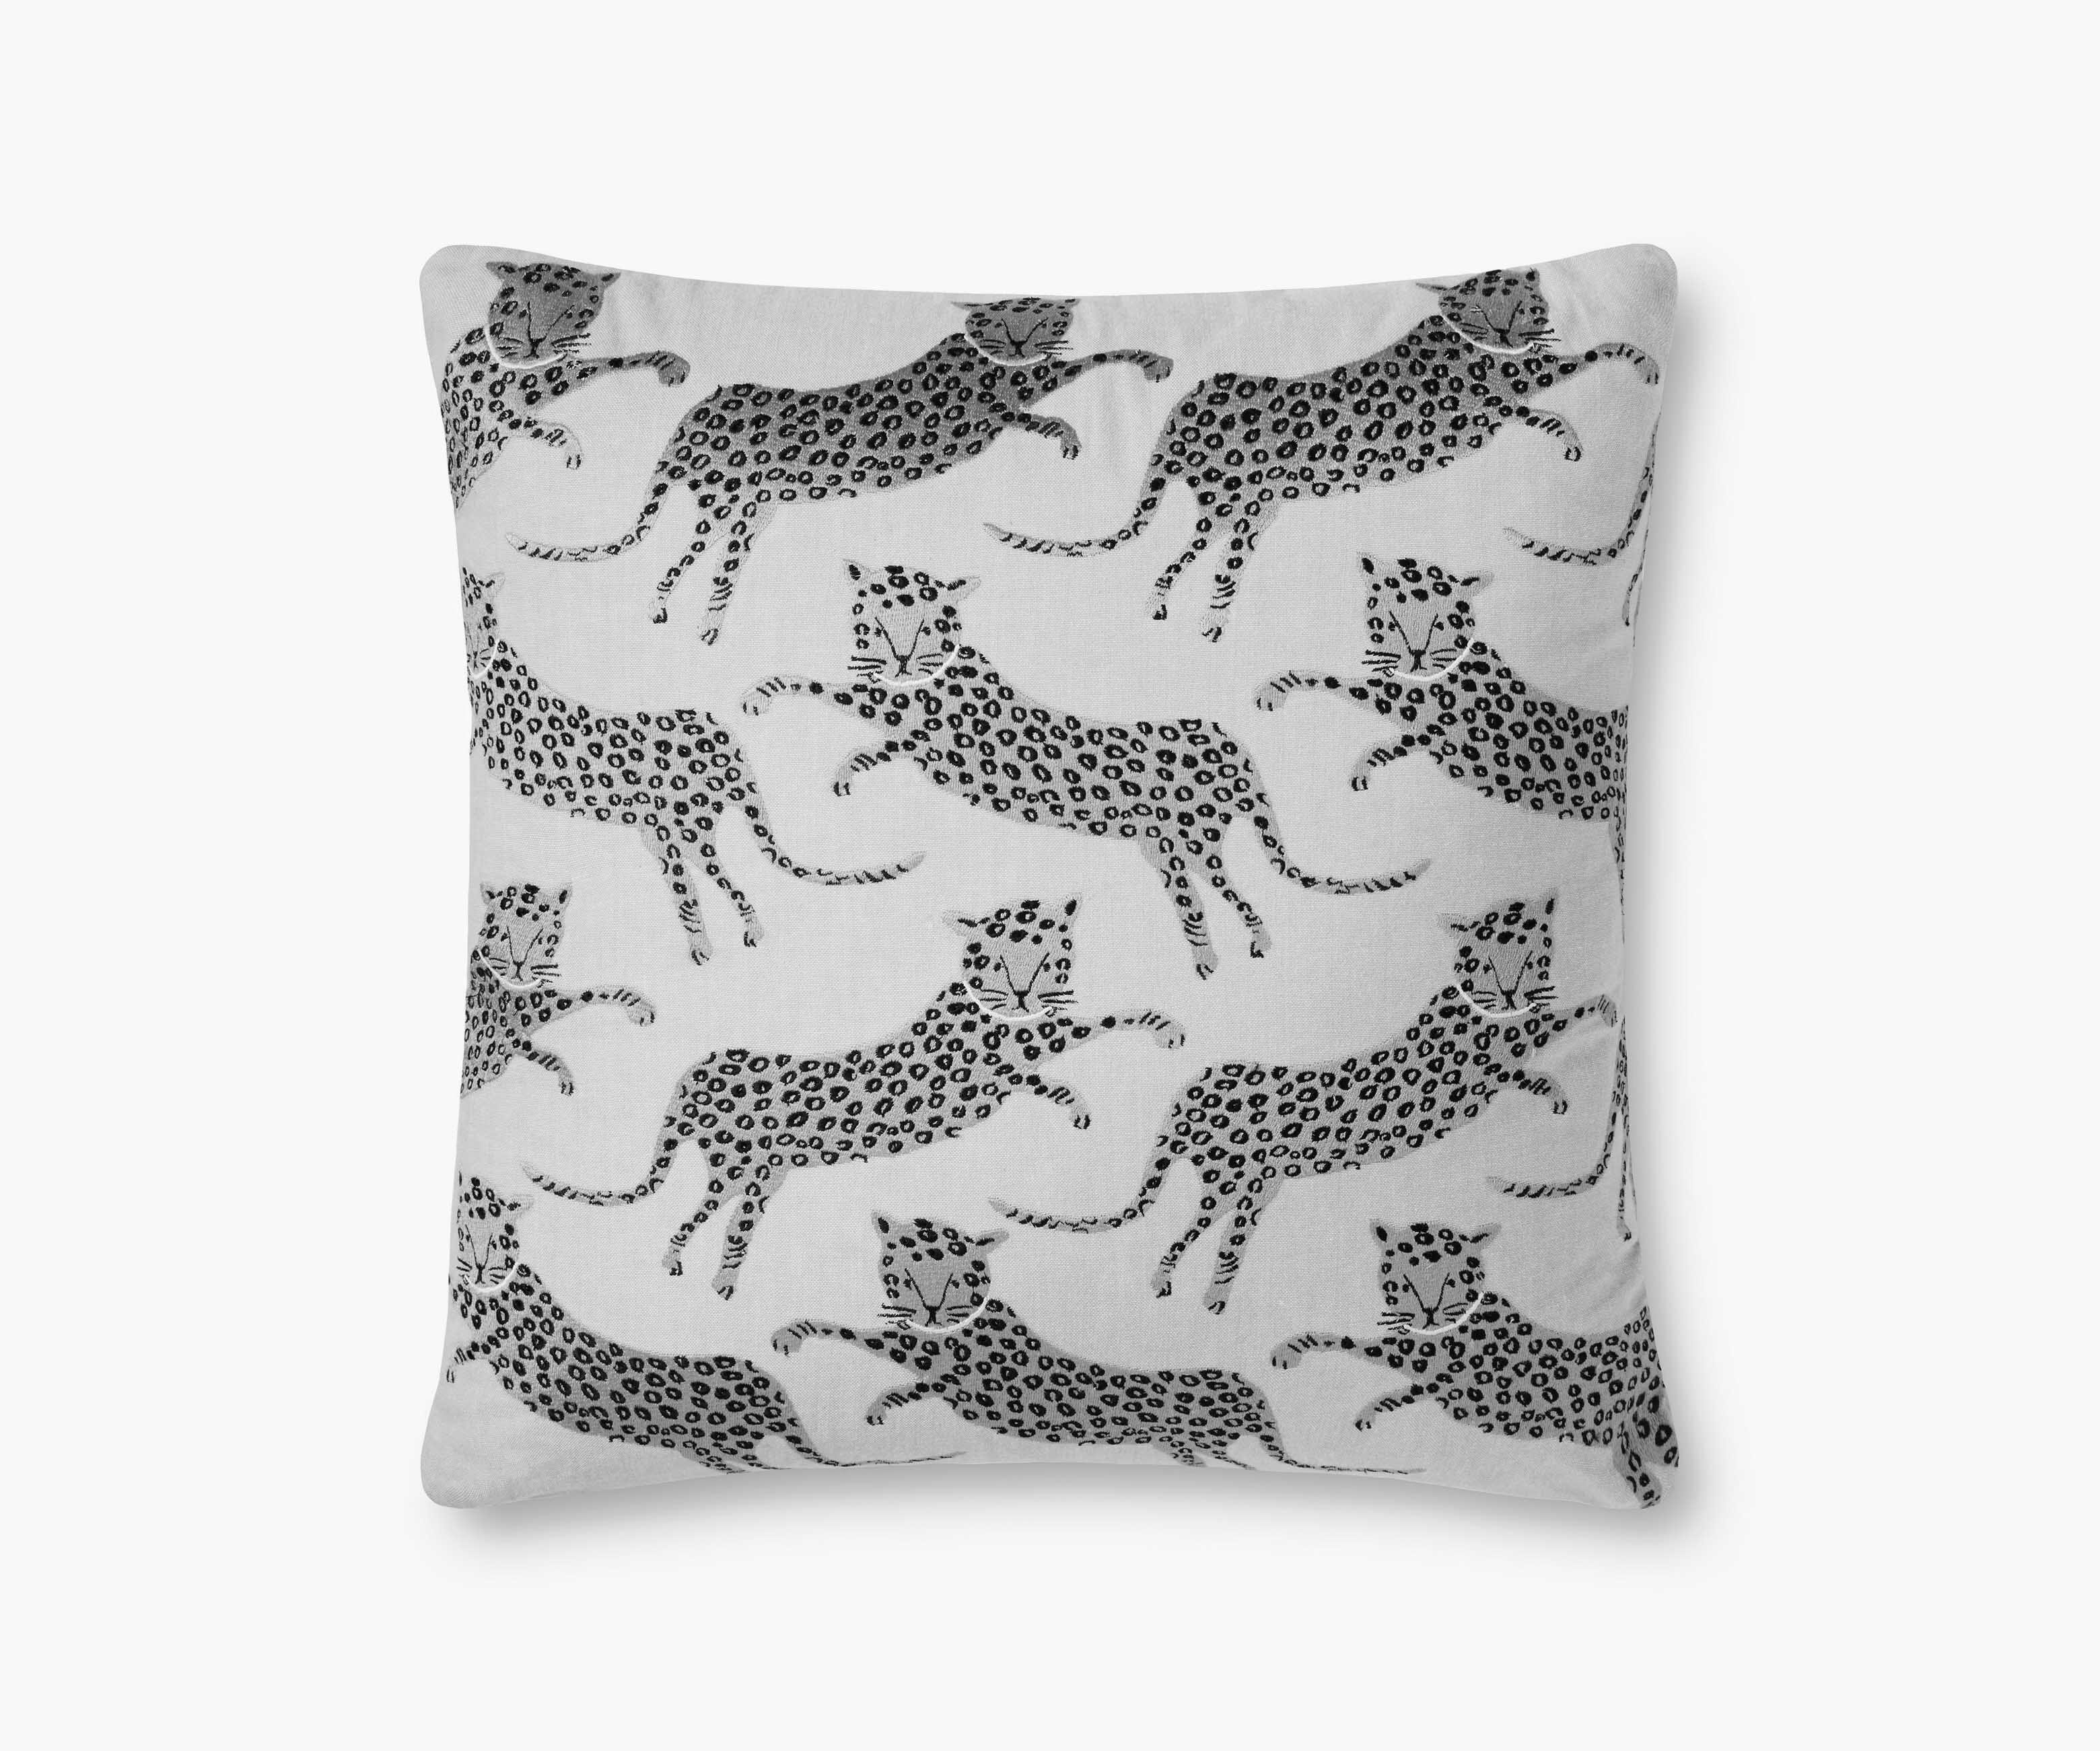 Kids - Pillows & Throws - Home | Rifle Paper Co.